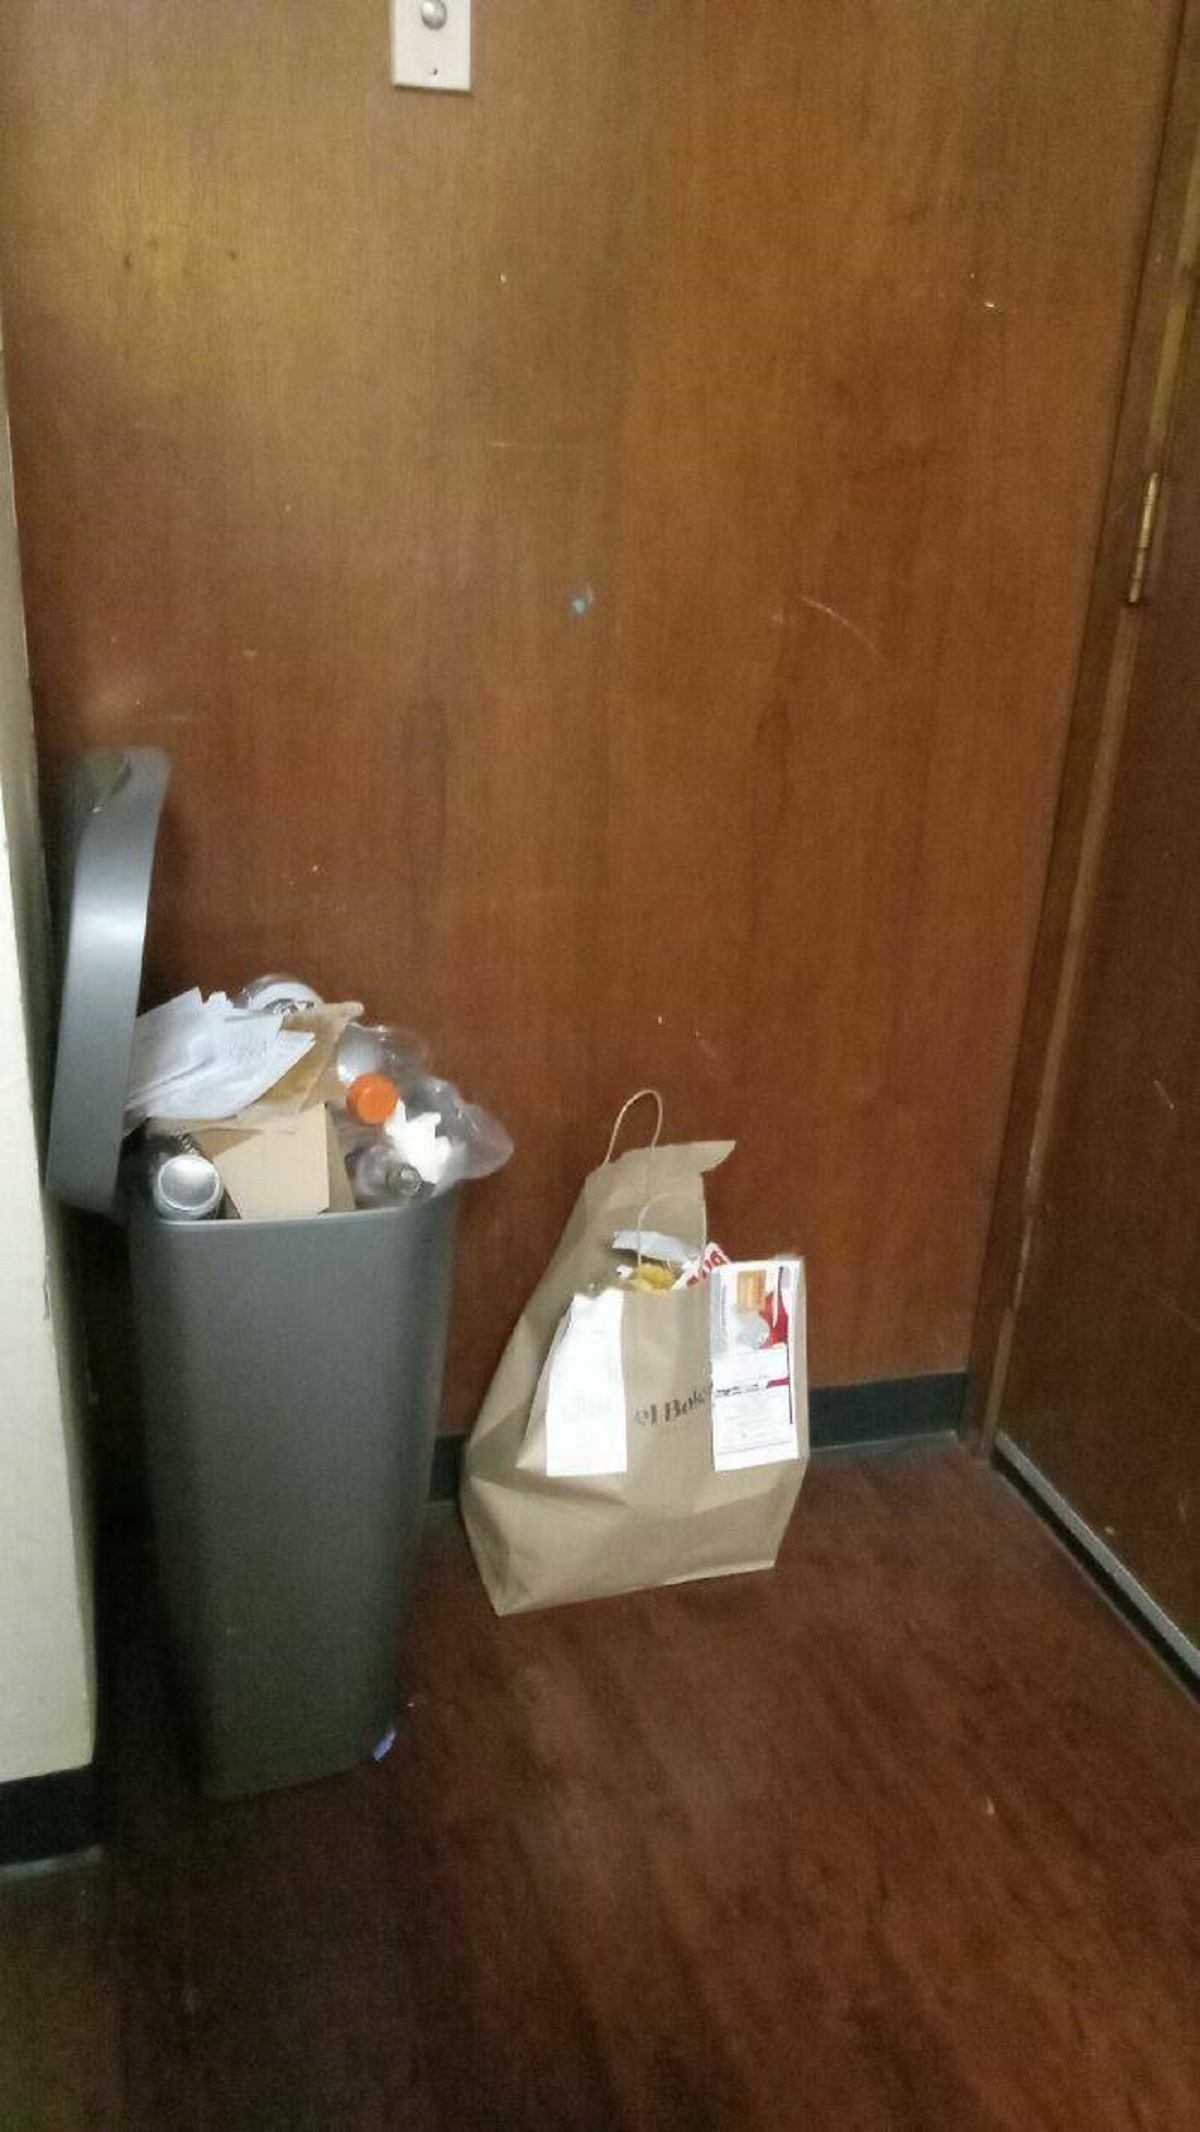 "The Way No One Bothers Taking Trash Out At Work"